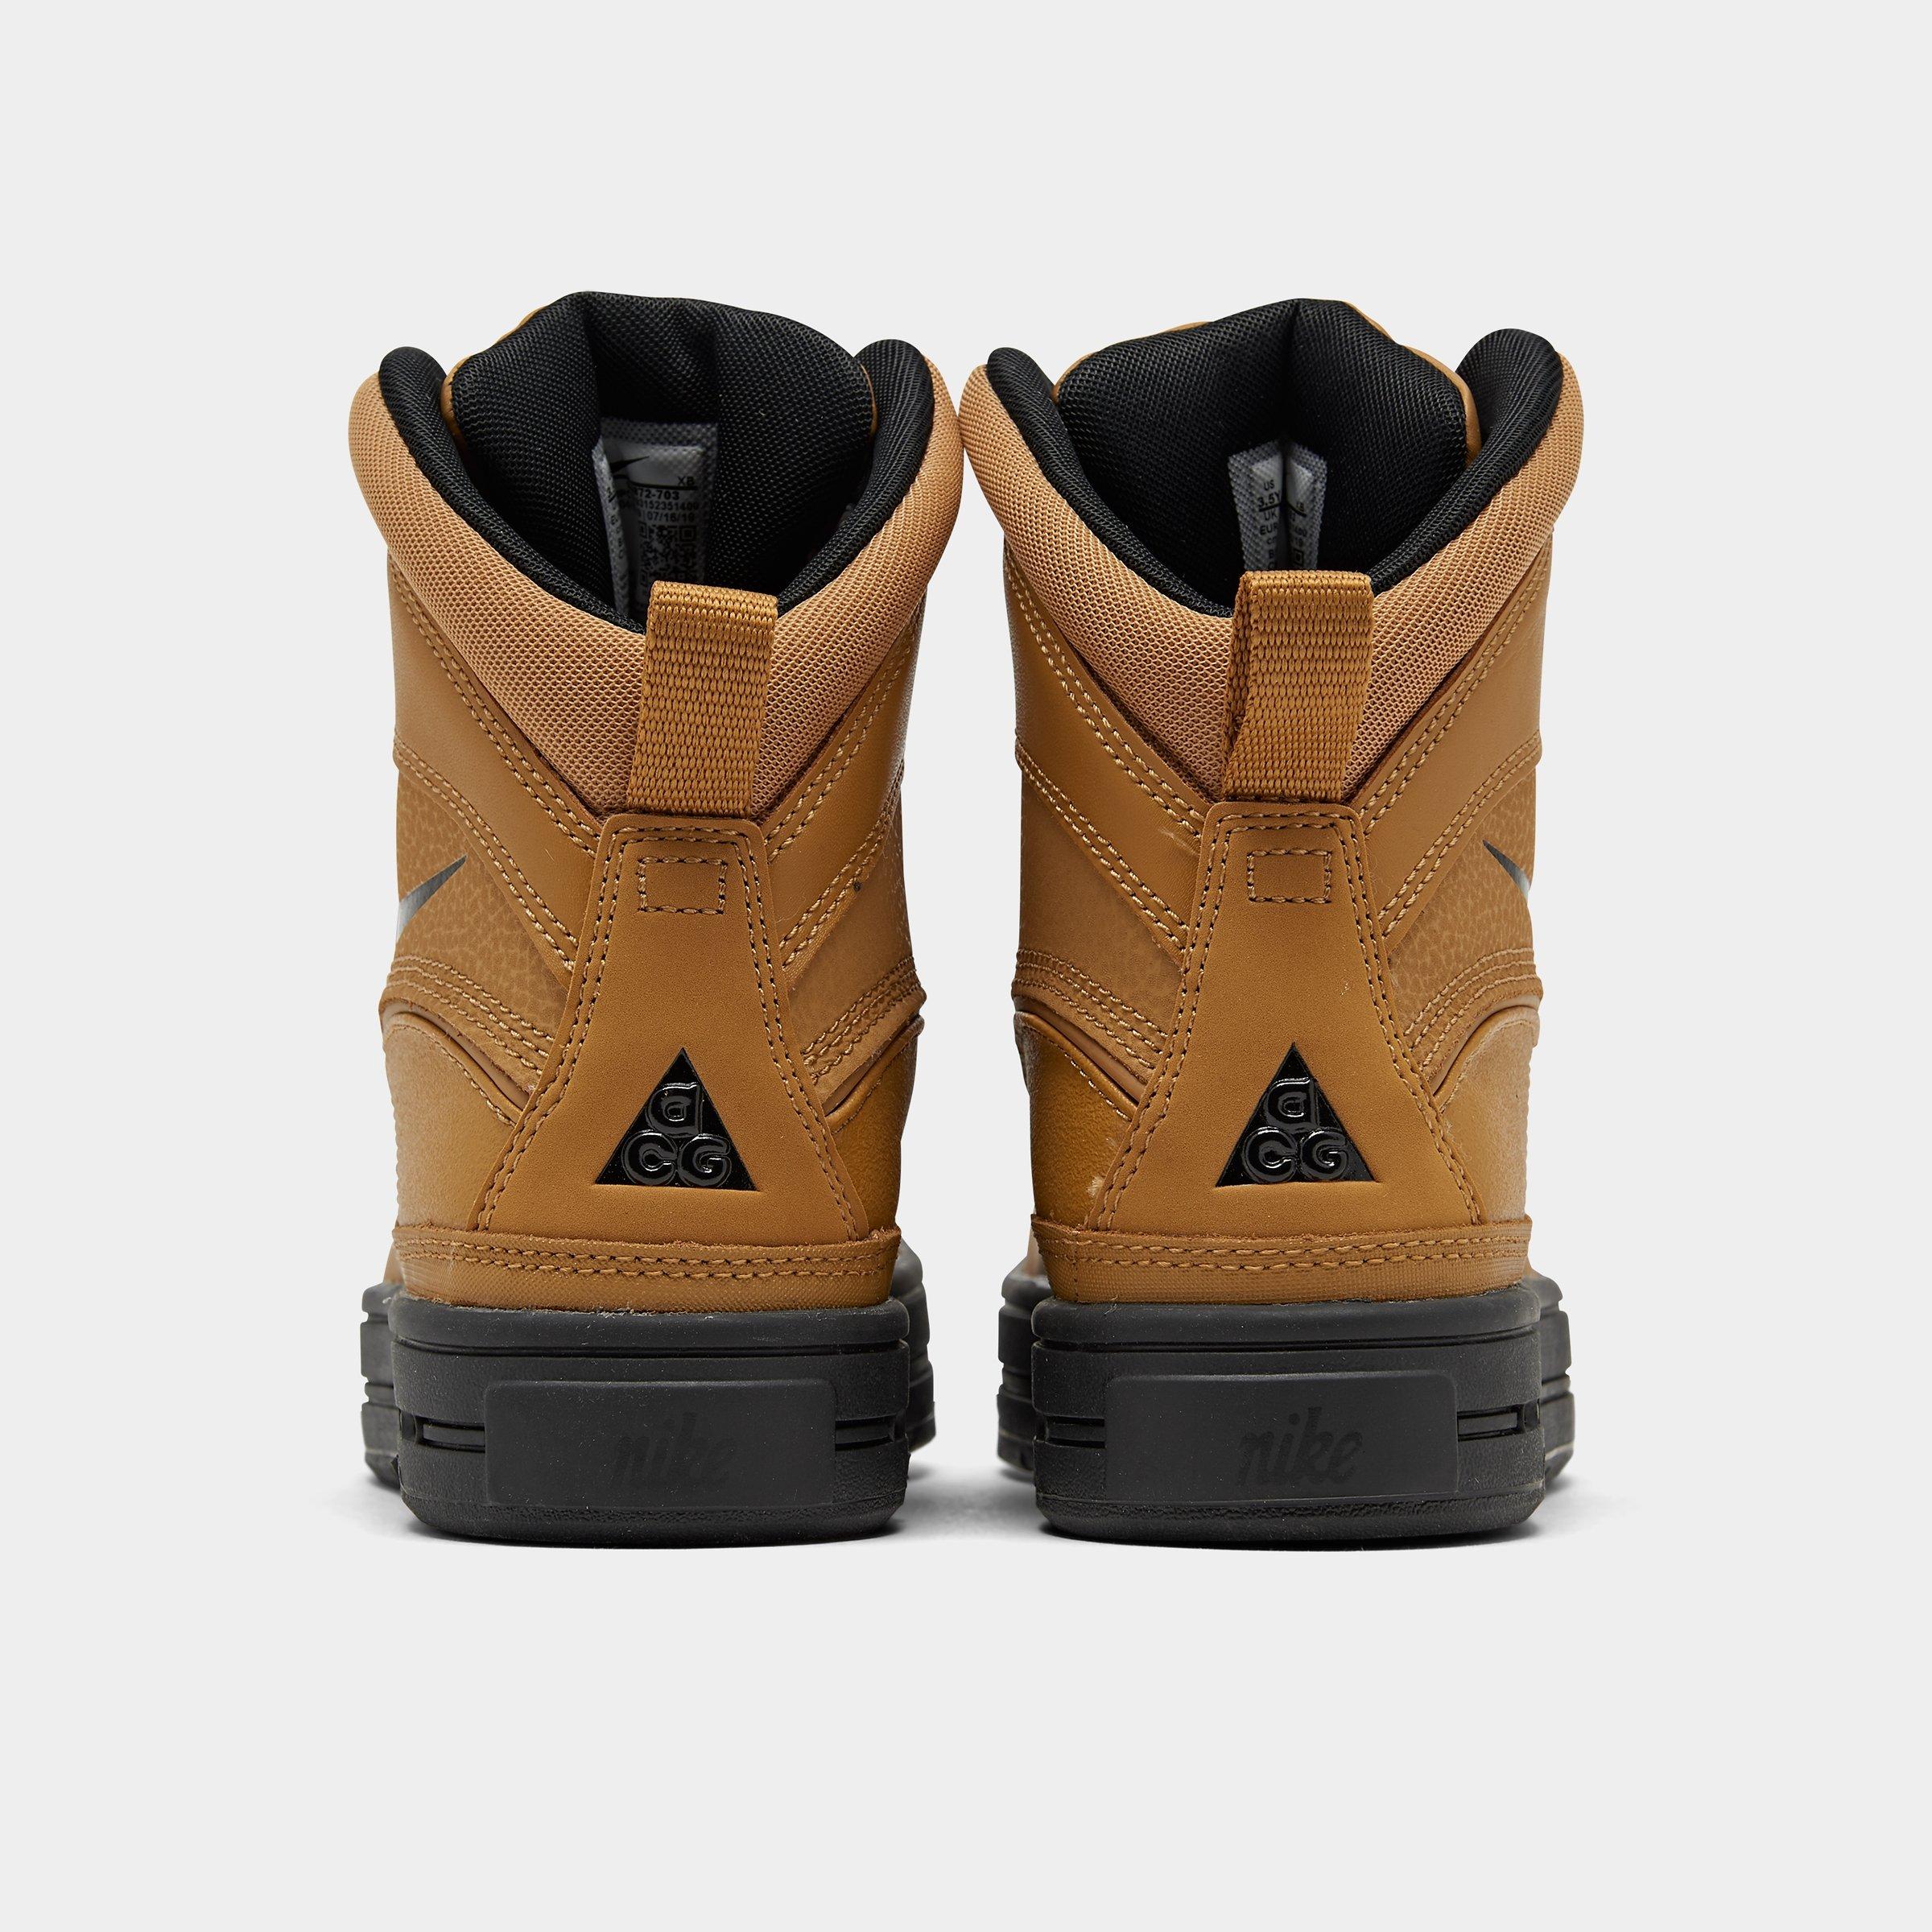 nike acg boots 6 inch